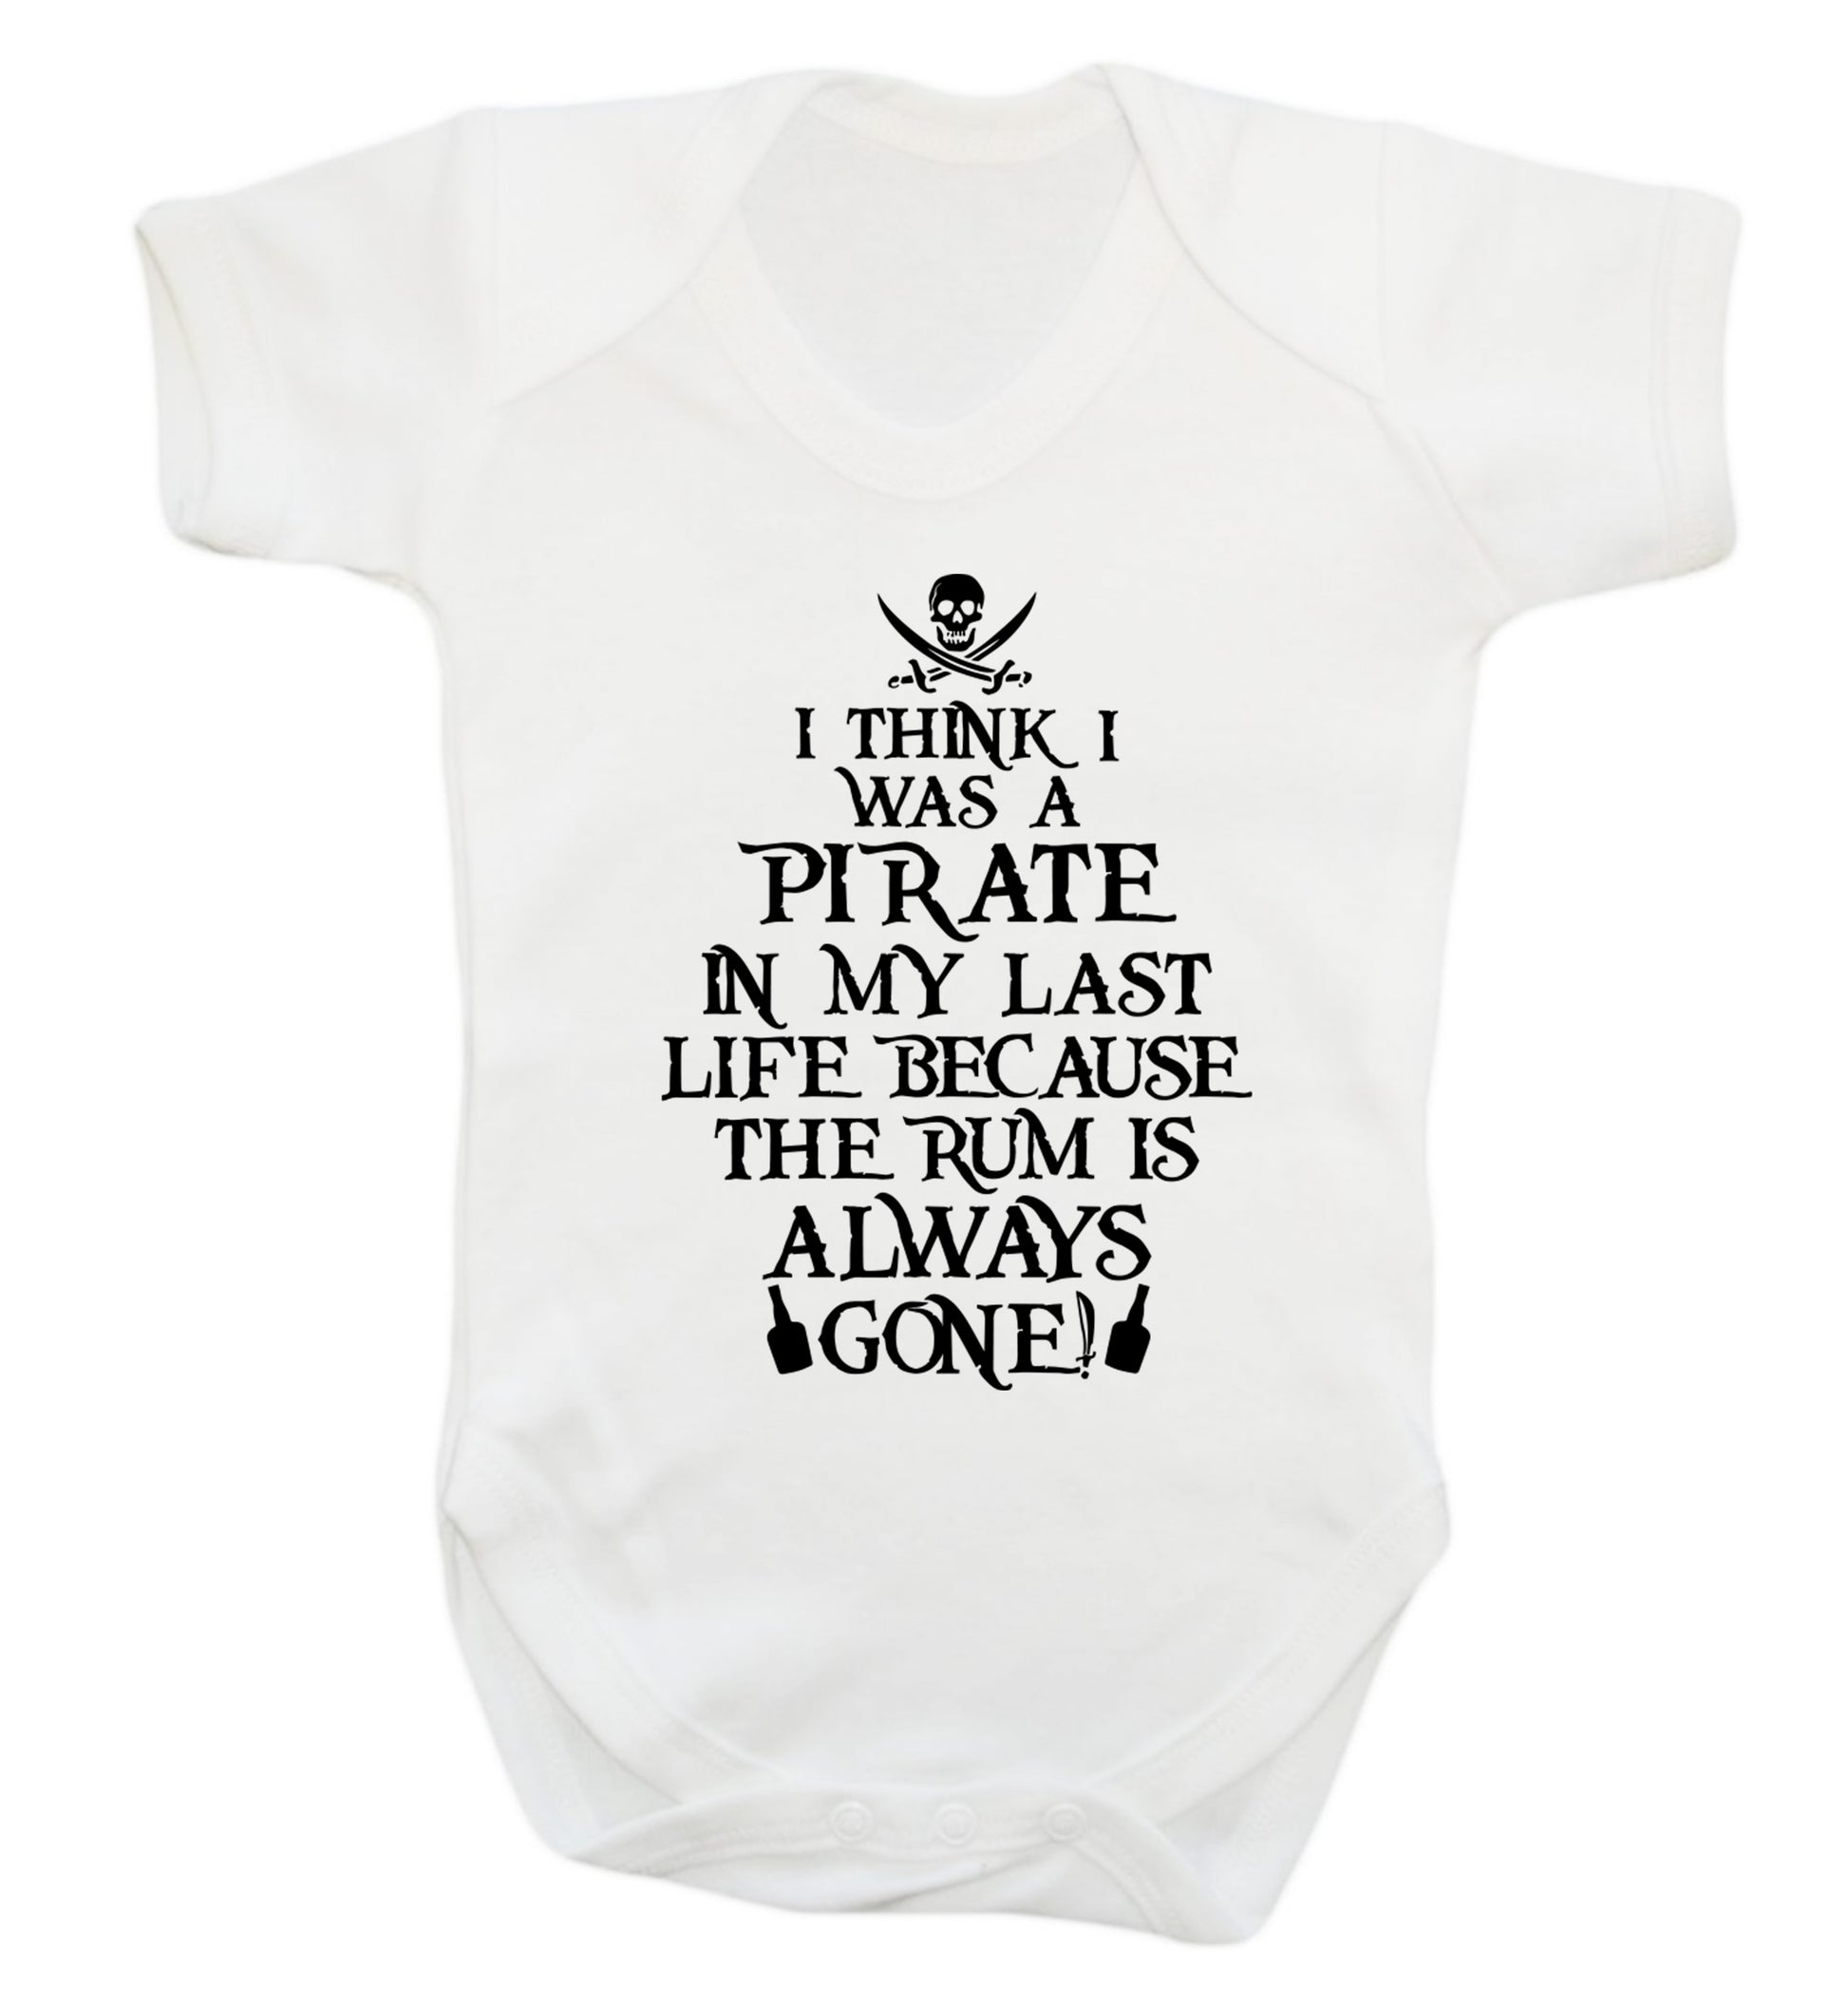 I think I was a pirate in my past life because the rum is always gone! Baby Vest white 18-24 months